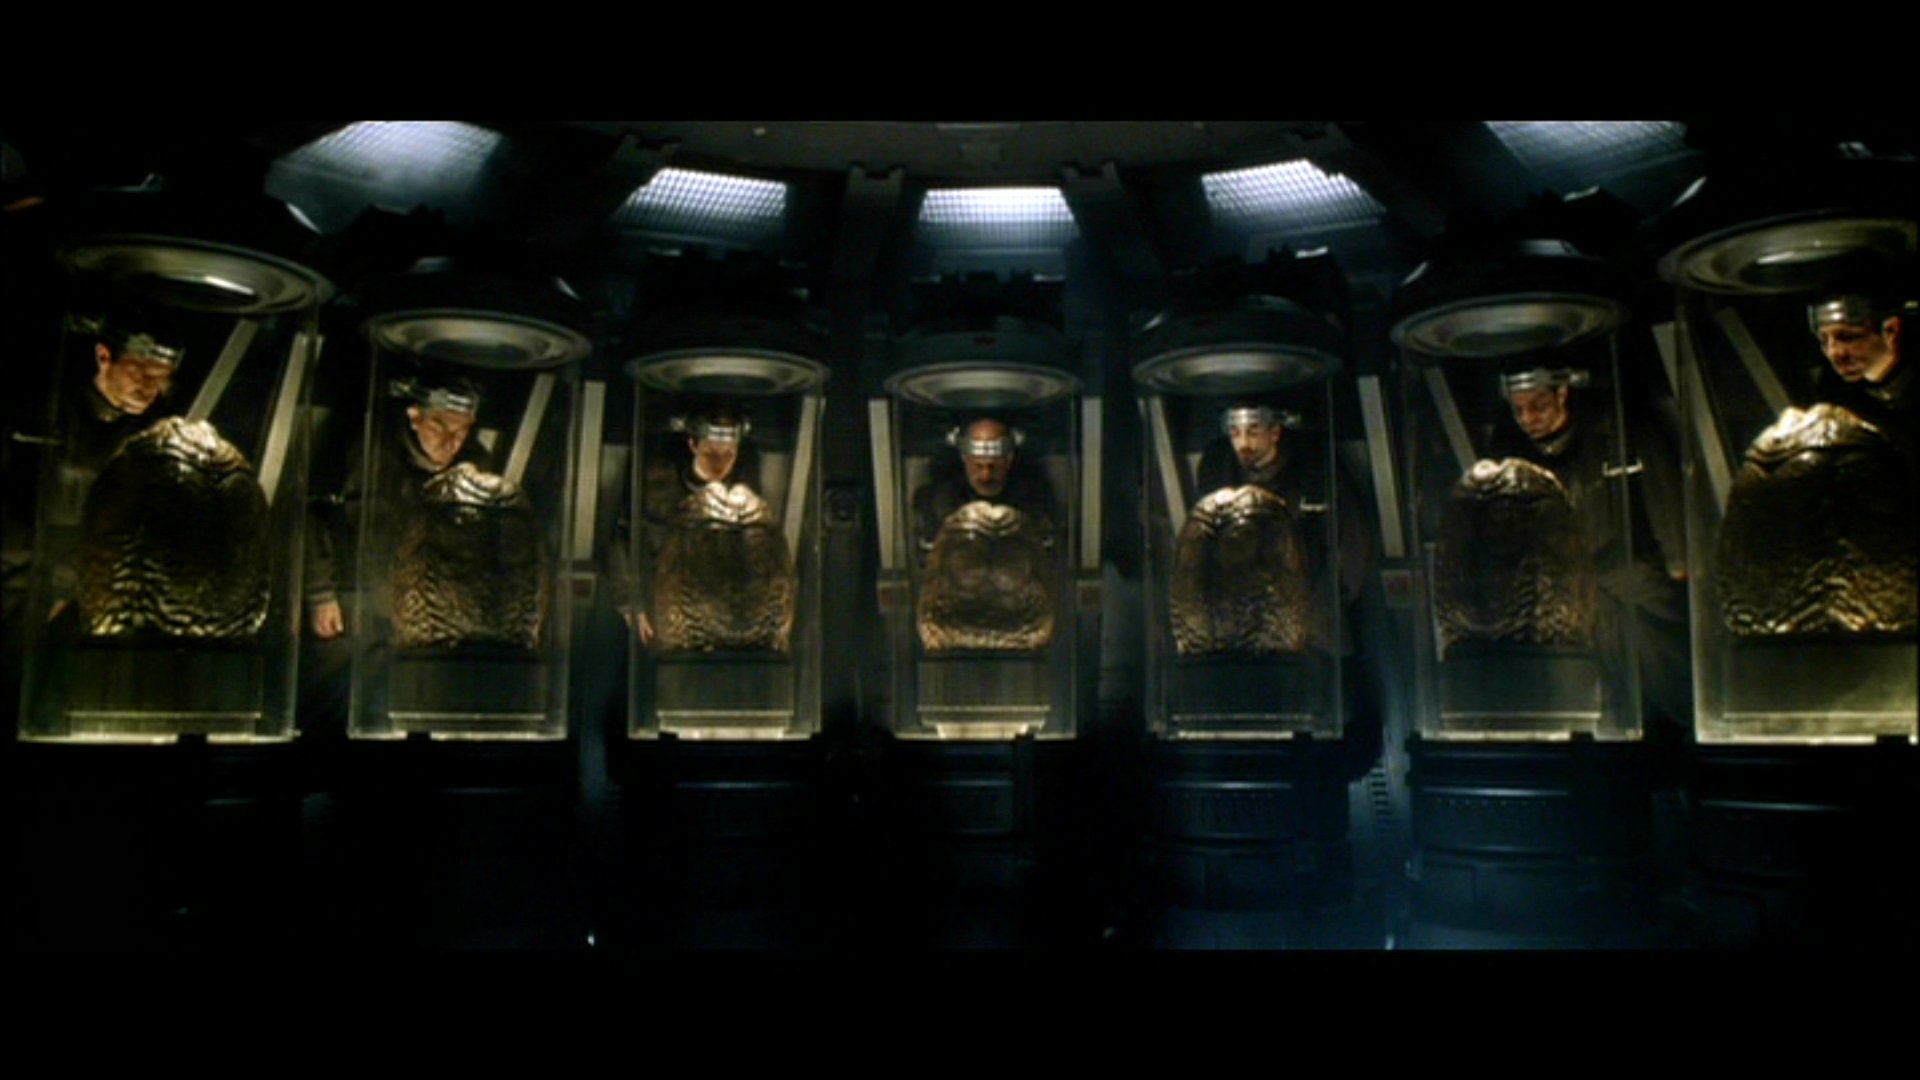 Alien: Resurrection Full HD Wallpaper and Background Image | 1920x1080 | ID:239247